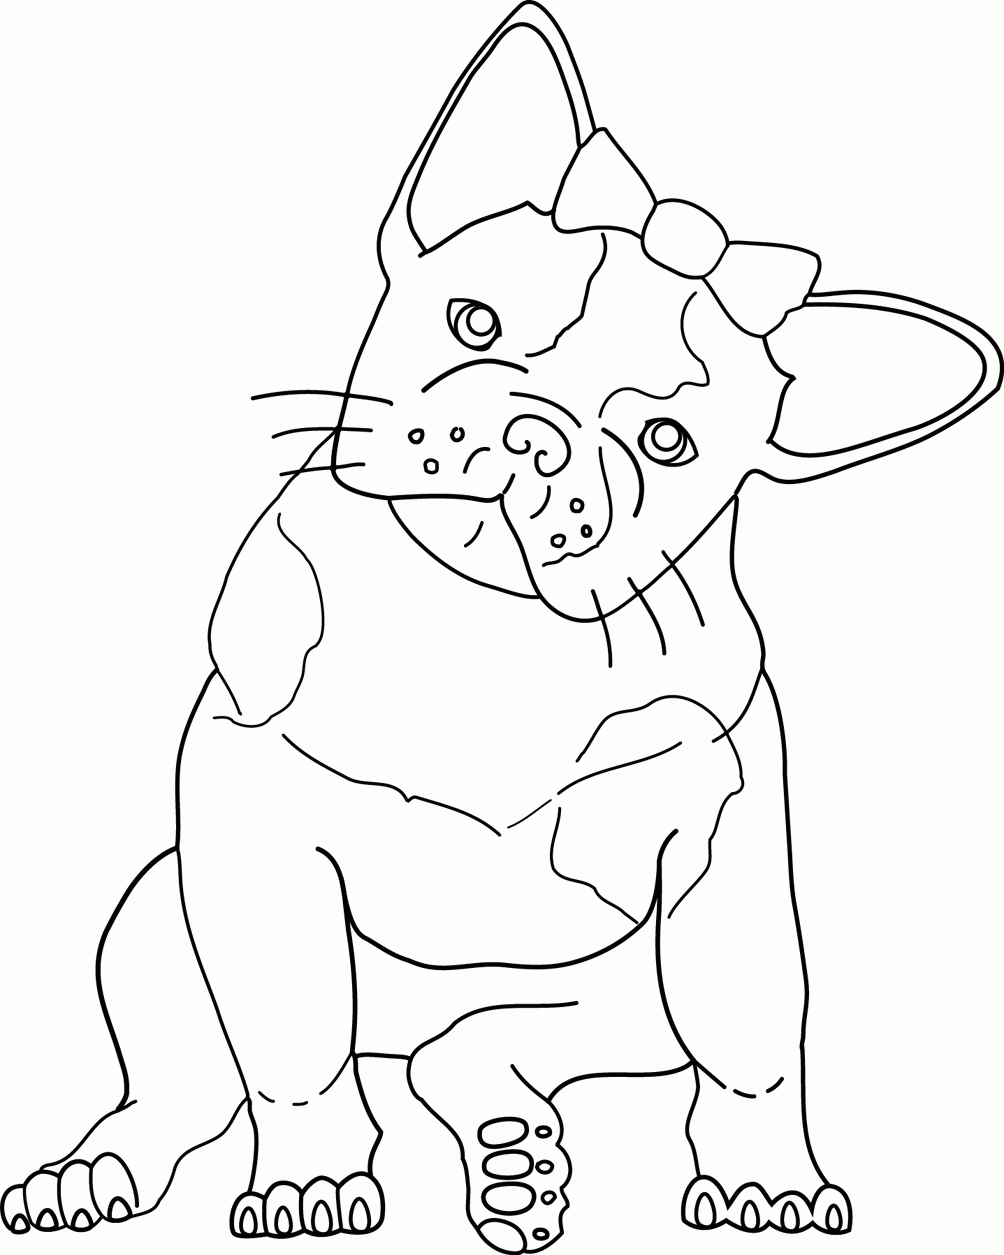 14 Pics of French Bulldog Coloring Pages Printable - French ...